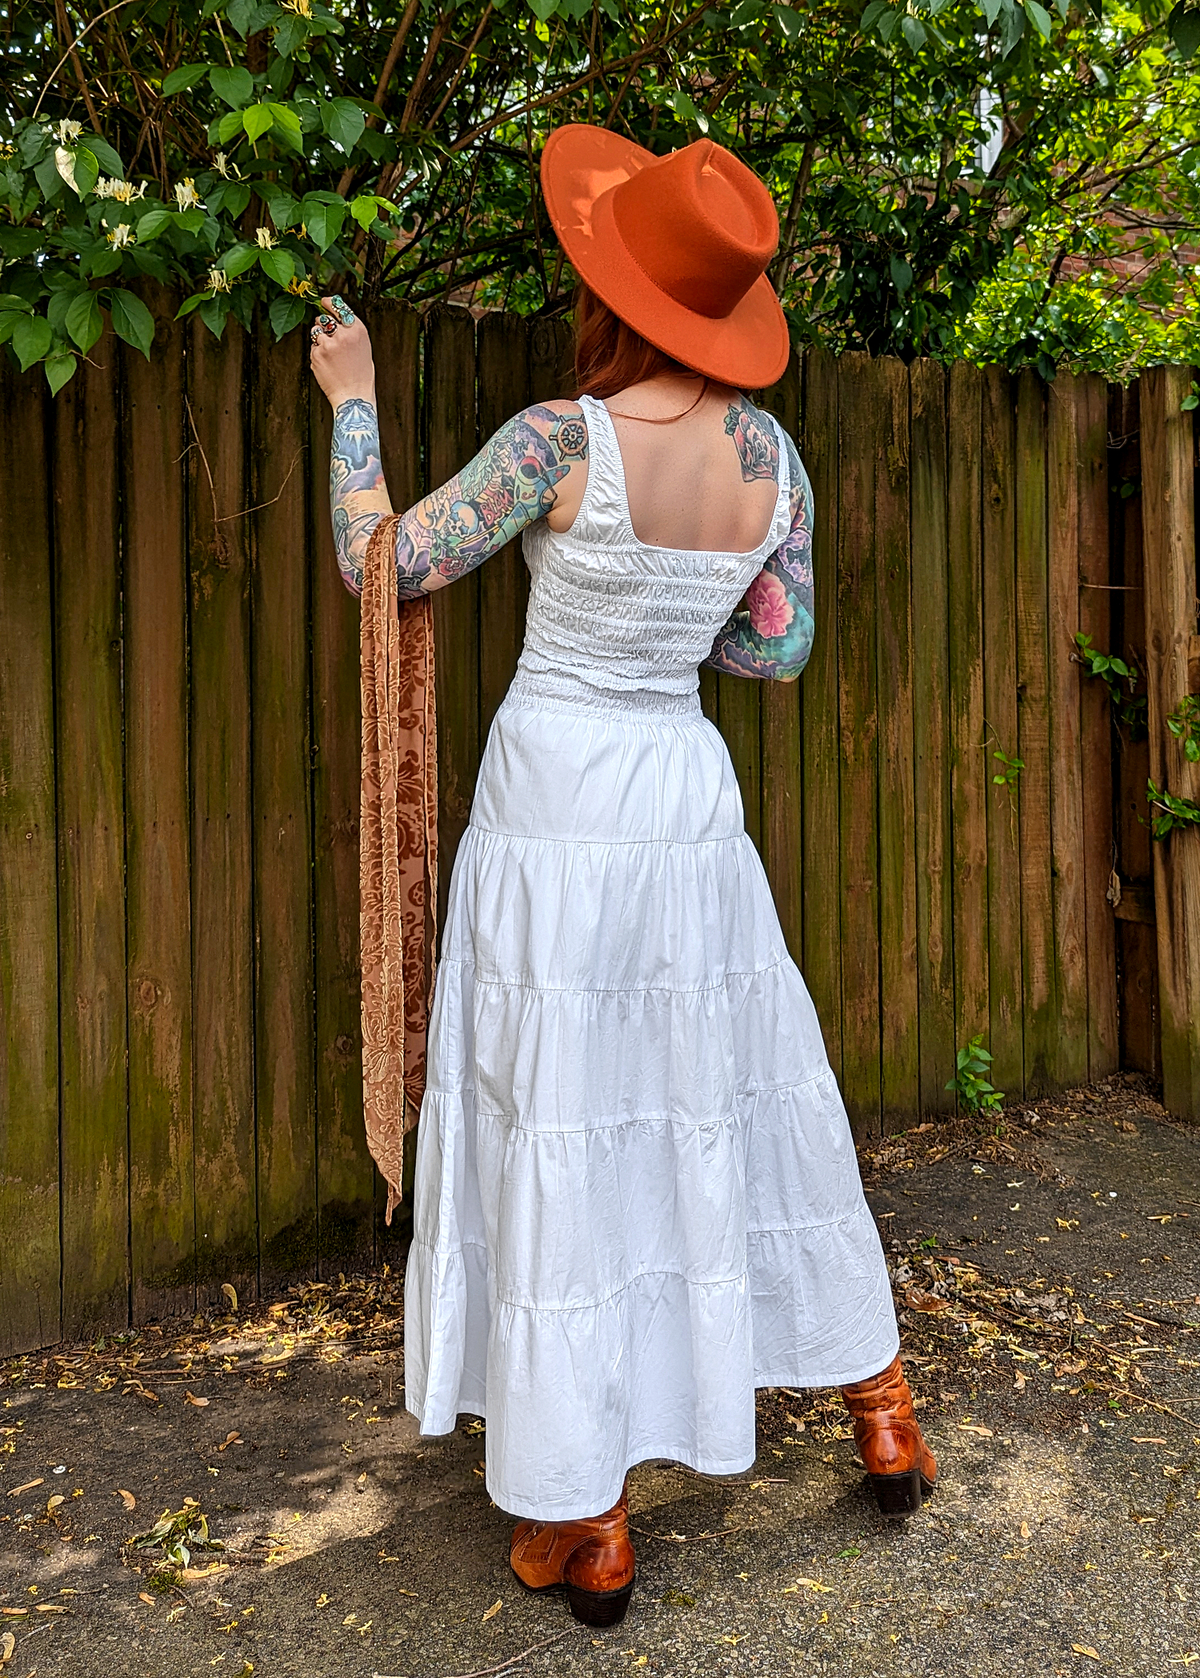 70s inspired dreamy prairie crisp white cotton smocked midi sundress with button front and tiered skirt by Motel Rocks